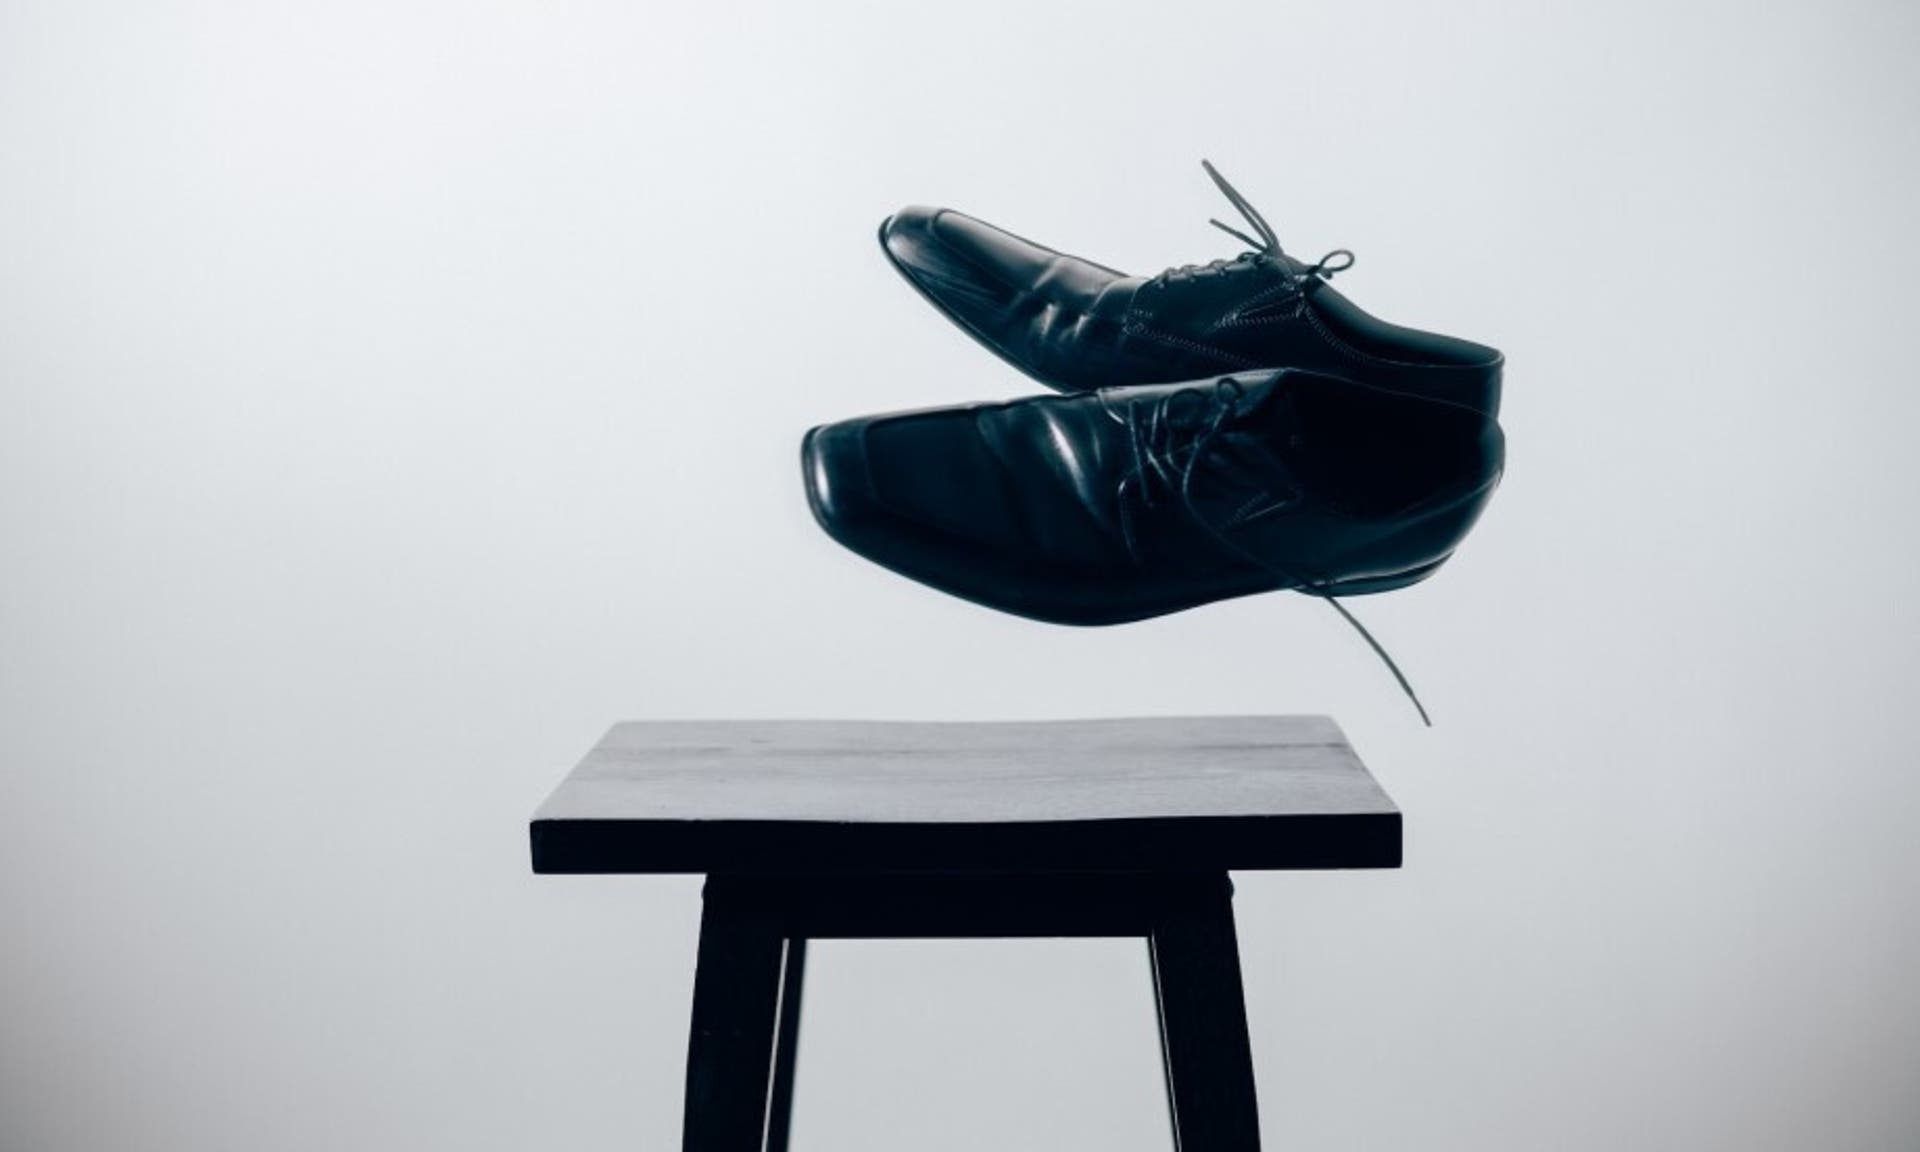  A pair of smart, black shoes artistically floating above a stool 